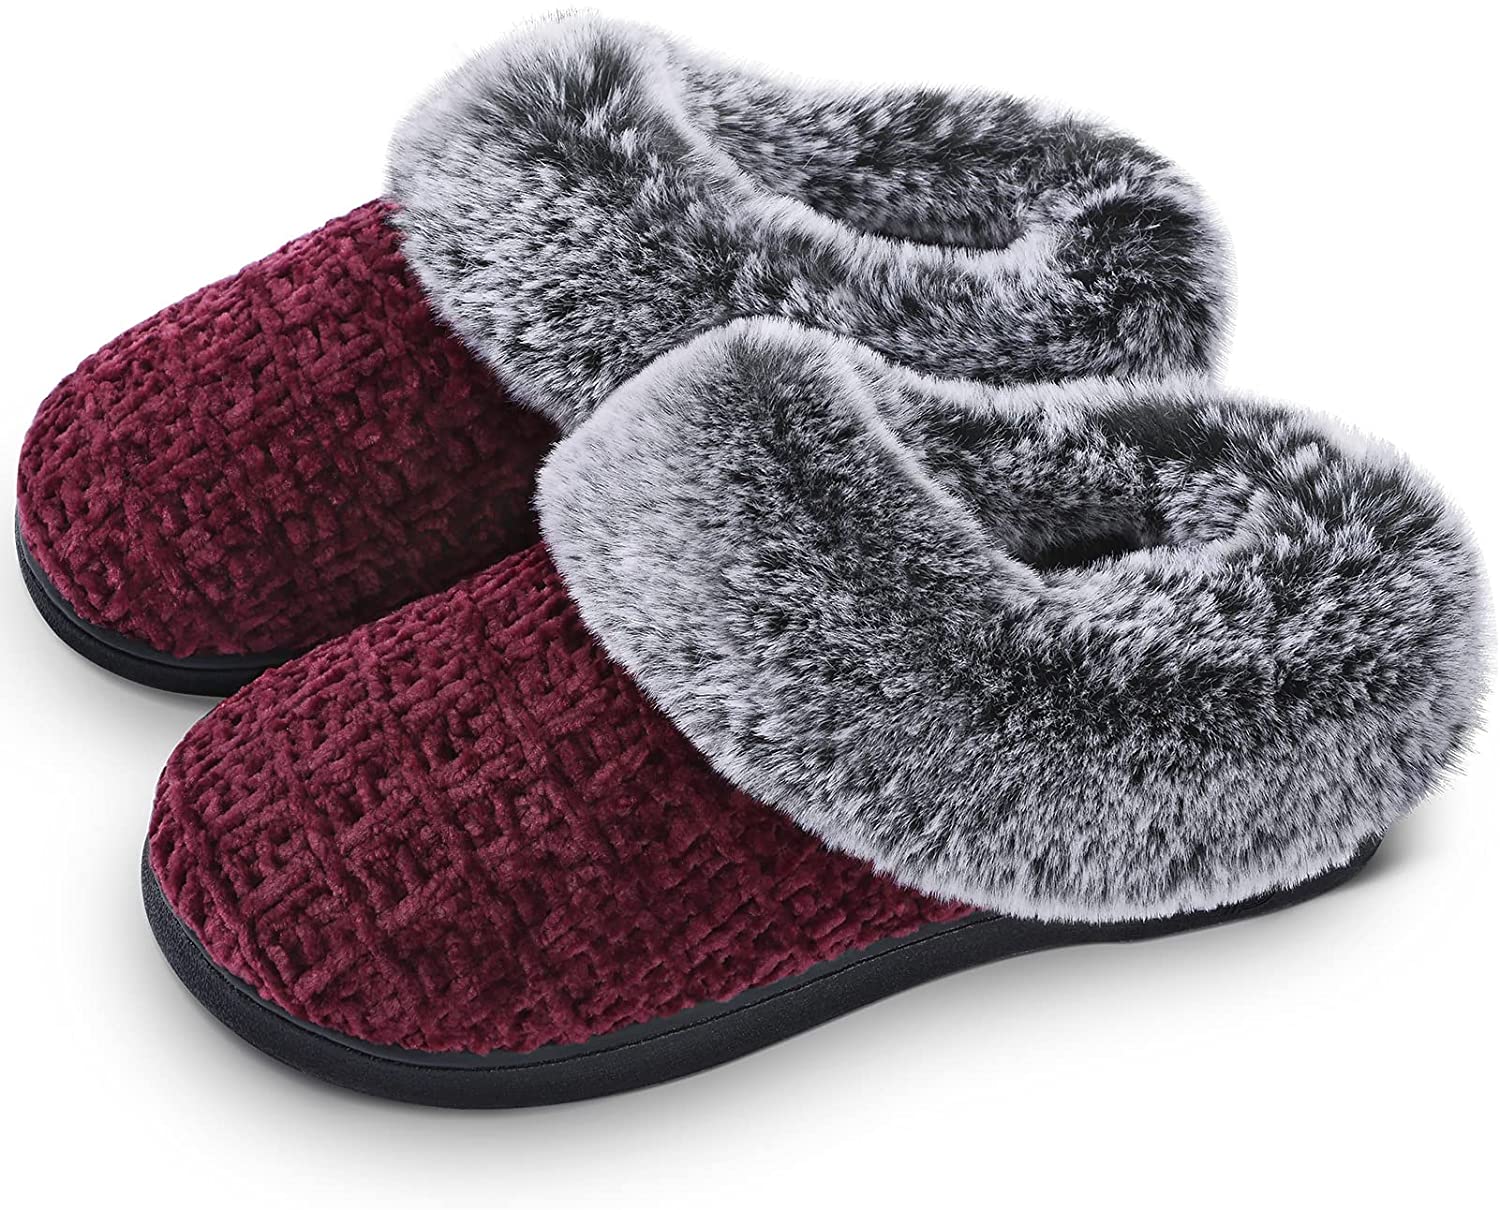 Theoylos Womens Soft Knitted Slippers Memory Foam Non-Slip Sole House Shoes w/Faux Fur Collar Indoor & Outdoor 